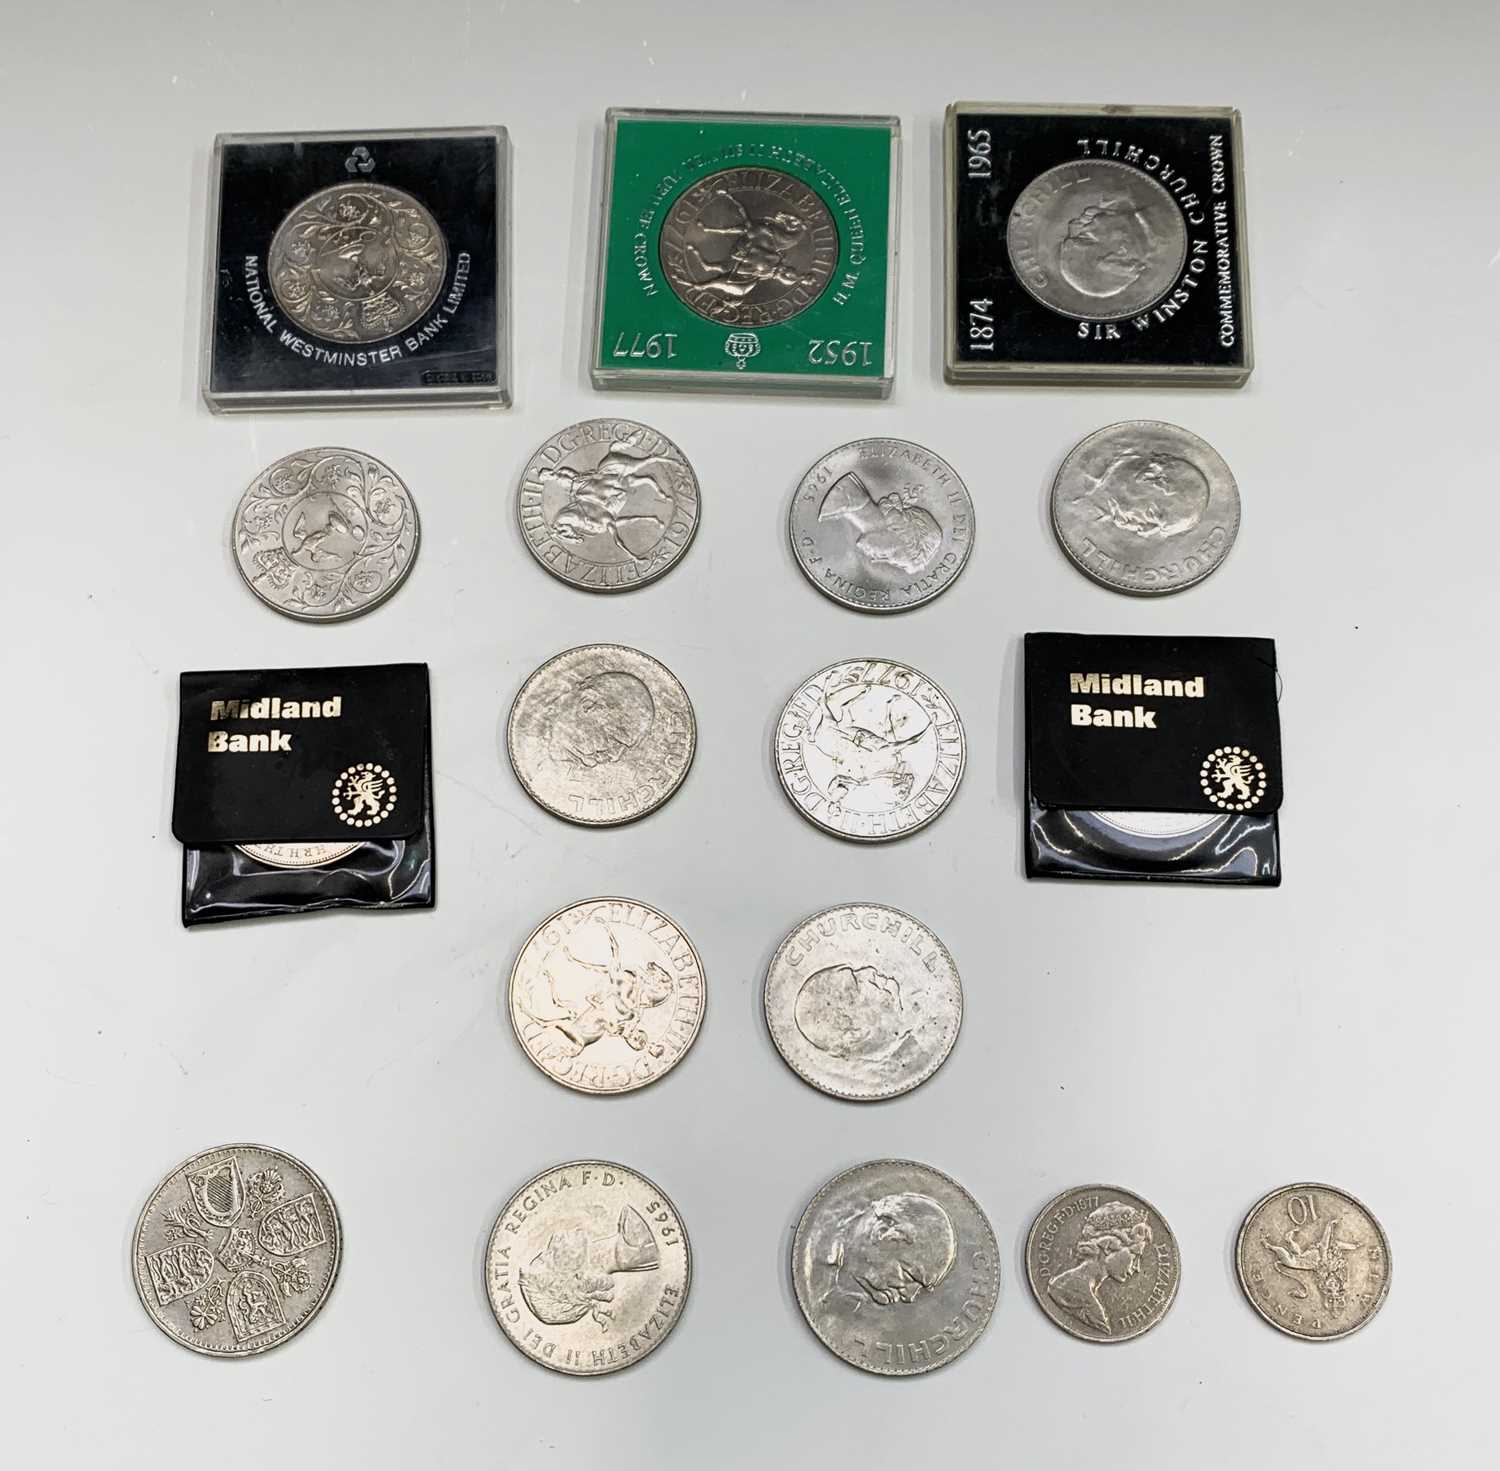 TOKENS, OTHER COINS, BADGES & WORLD WAR 2 BANKNOTES: Lot includes a 1794 'Loyal Suffolk Yeomanry'